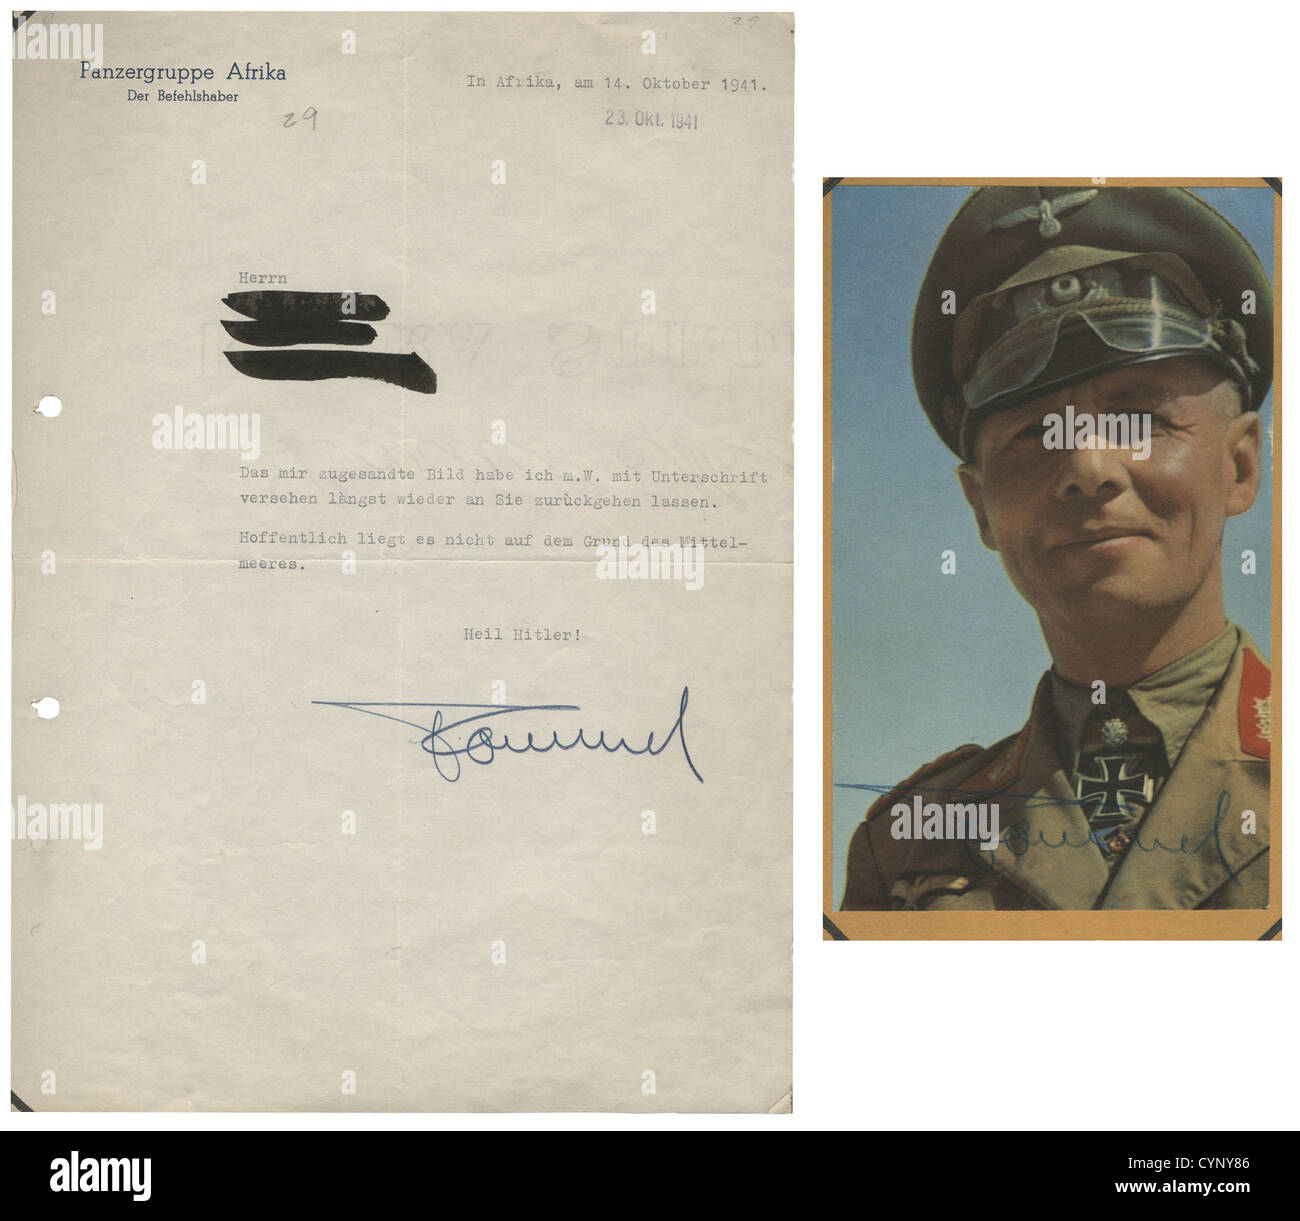 autographs, Erwin Rommel, letter and portrait, heading 'Panzergruppe Afrika - Der Befehlshaber', 14.10.1941, Second World War, North Africa, signature, text: 'The picture your sent I signed and returned long ago. Hopefully it is not recumbing on the botto of the Mediterranean Sea.' people, 1930s, 20th century, autograph, autographs, documents, document, written, signature, signatures, NS, National Socialism, Nazism, Third Reich, German Reich, Germany, object, objects, stills, clipping, clippings, cut out, cut-out, cut-outs, man, men, male, Stock Photo